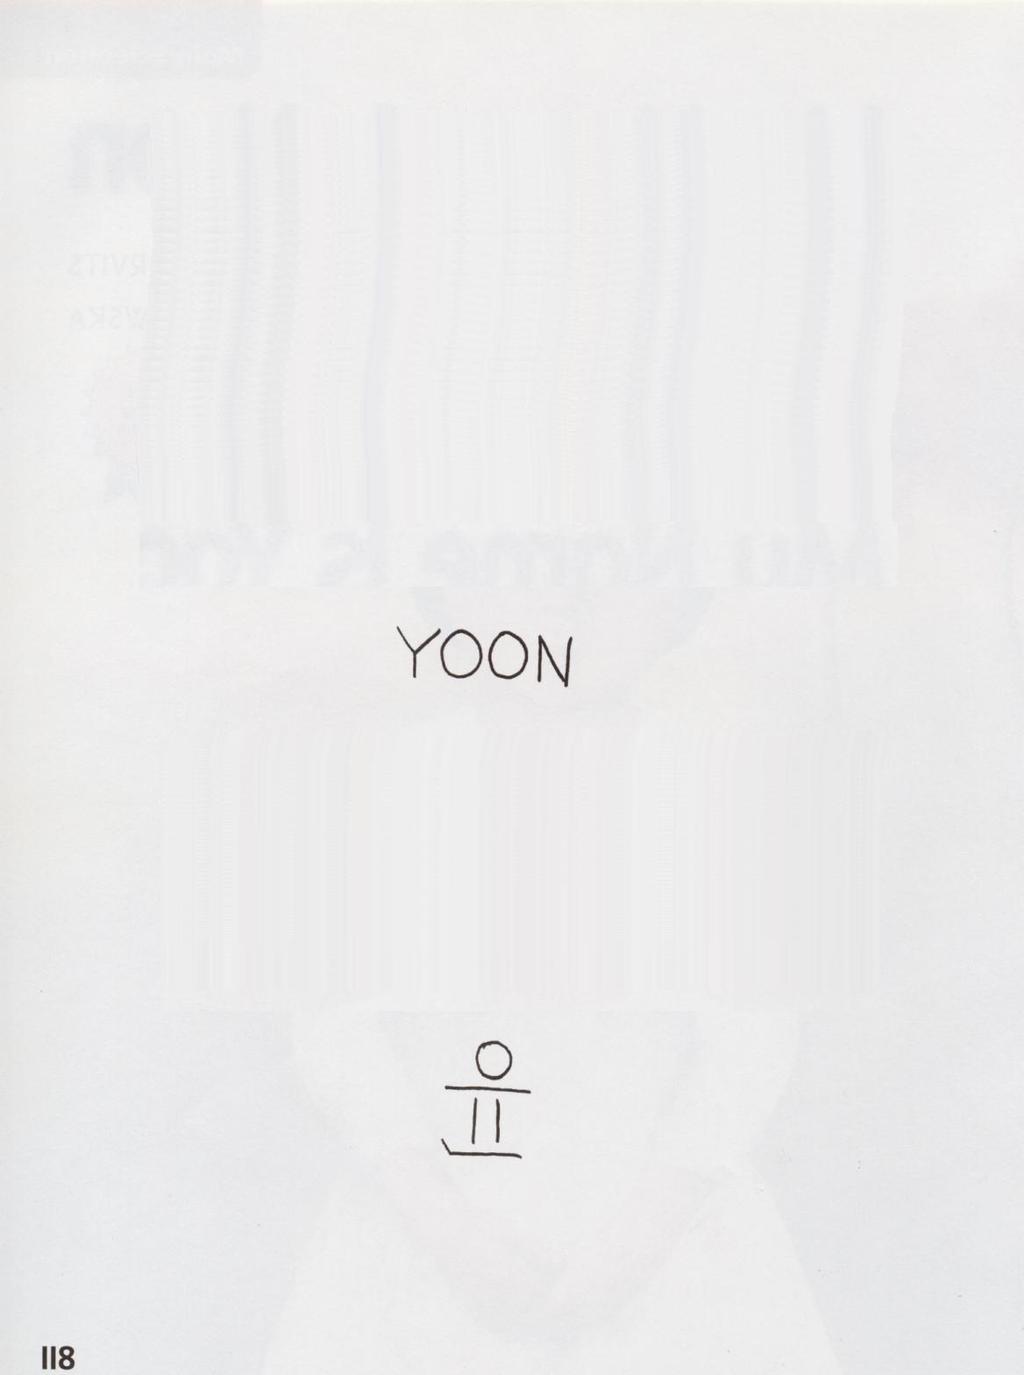 My name is Yoon. I came here from Korea, a country far away.